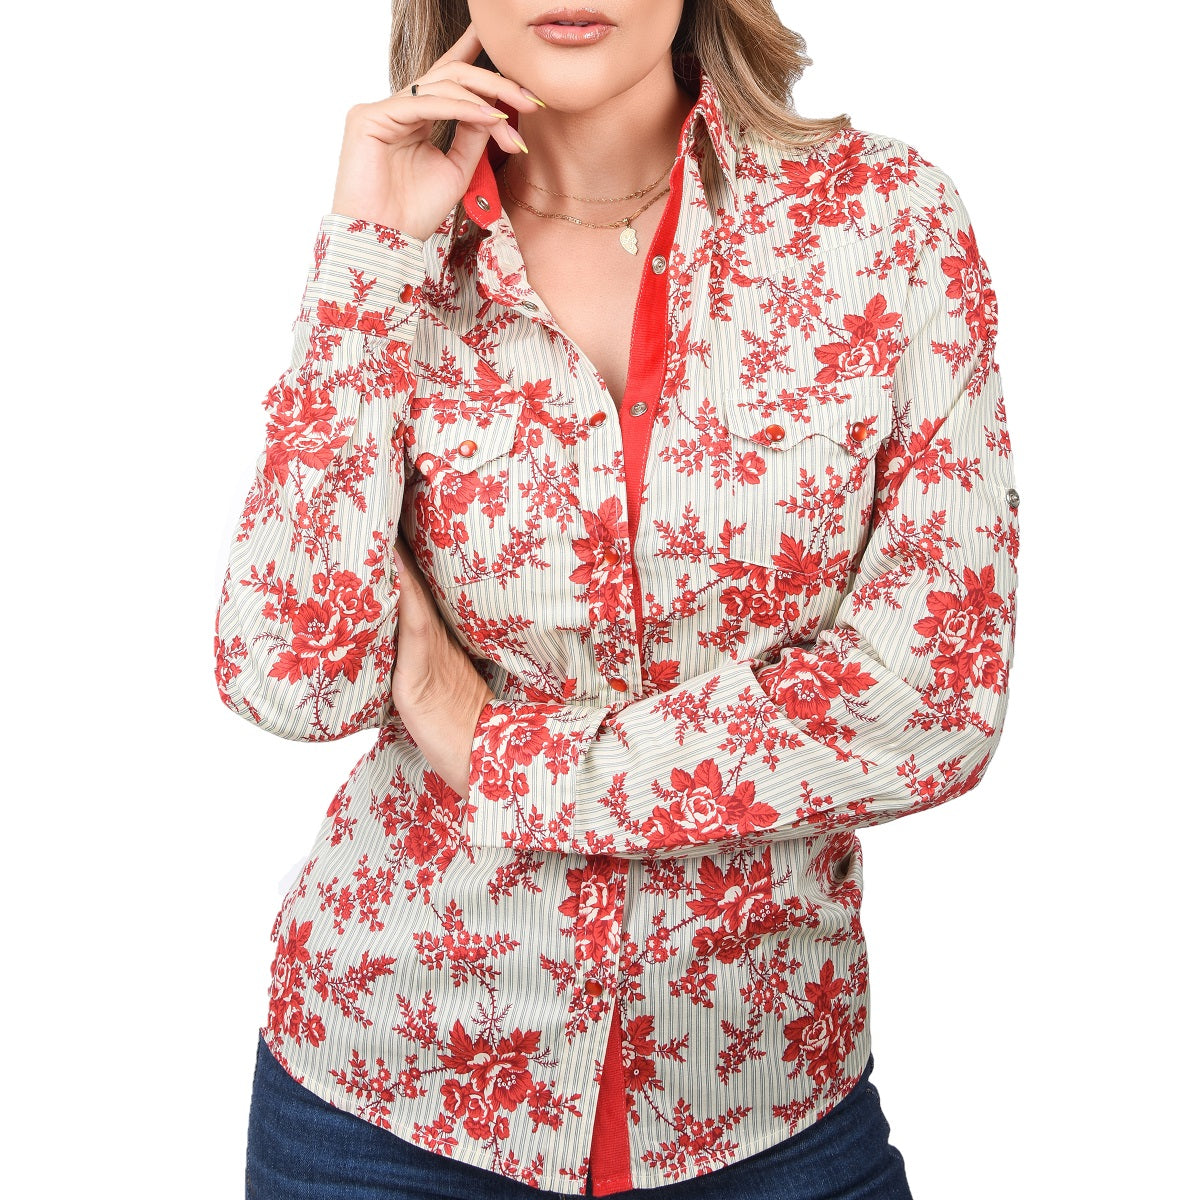 Western Shirt for Women NA-TM-WD0547